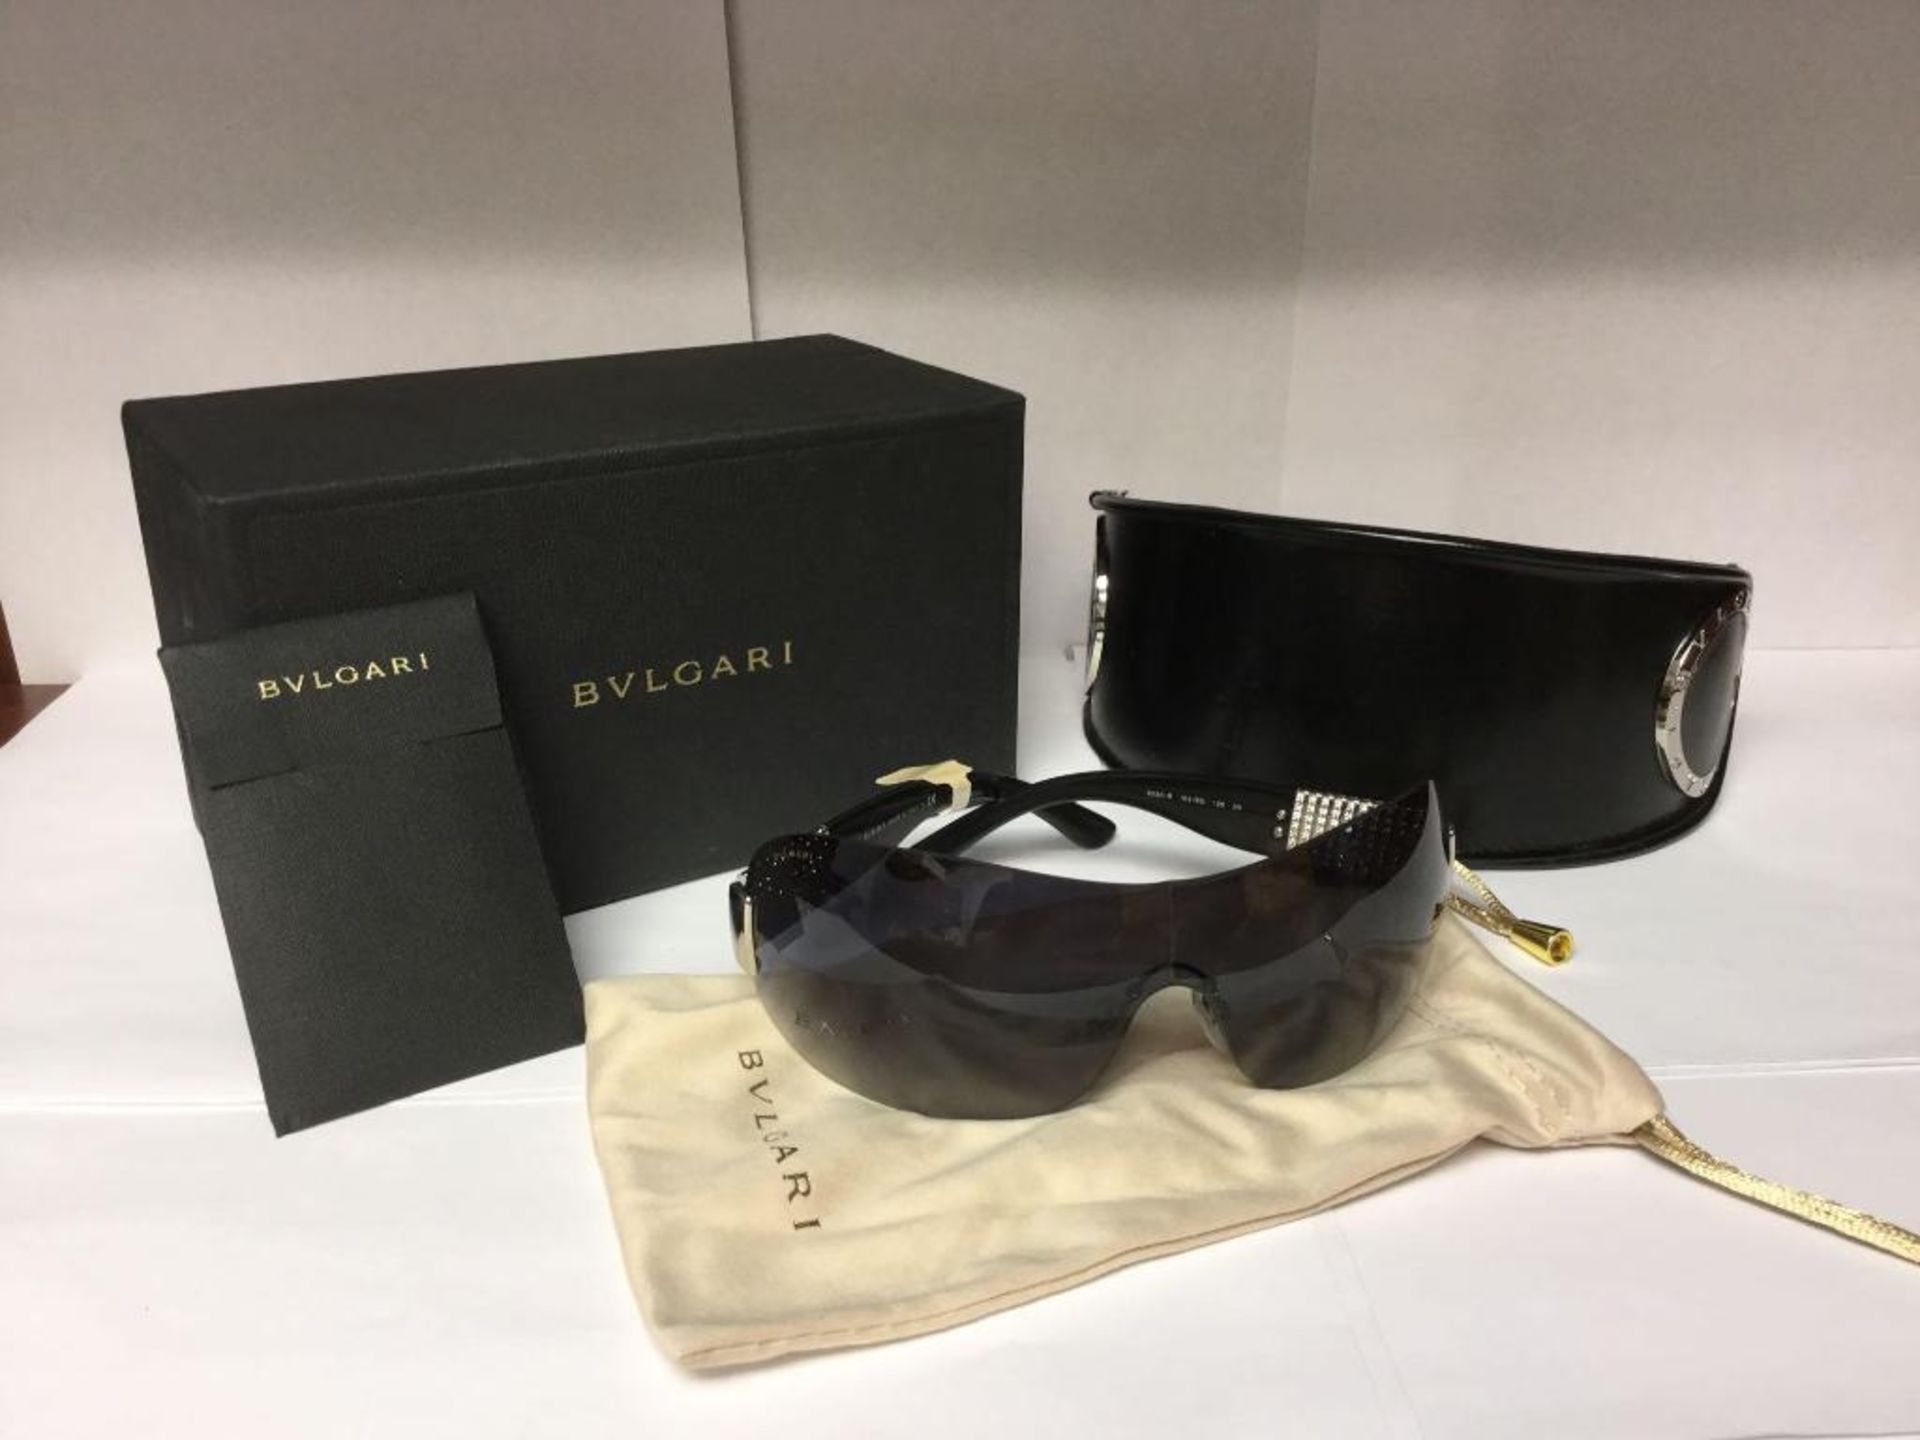 BVLGARI Sunglasses with case, box, and bags Value $ 503